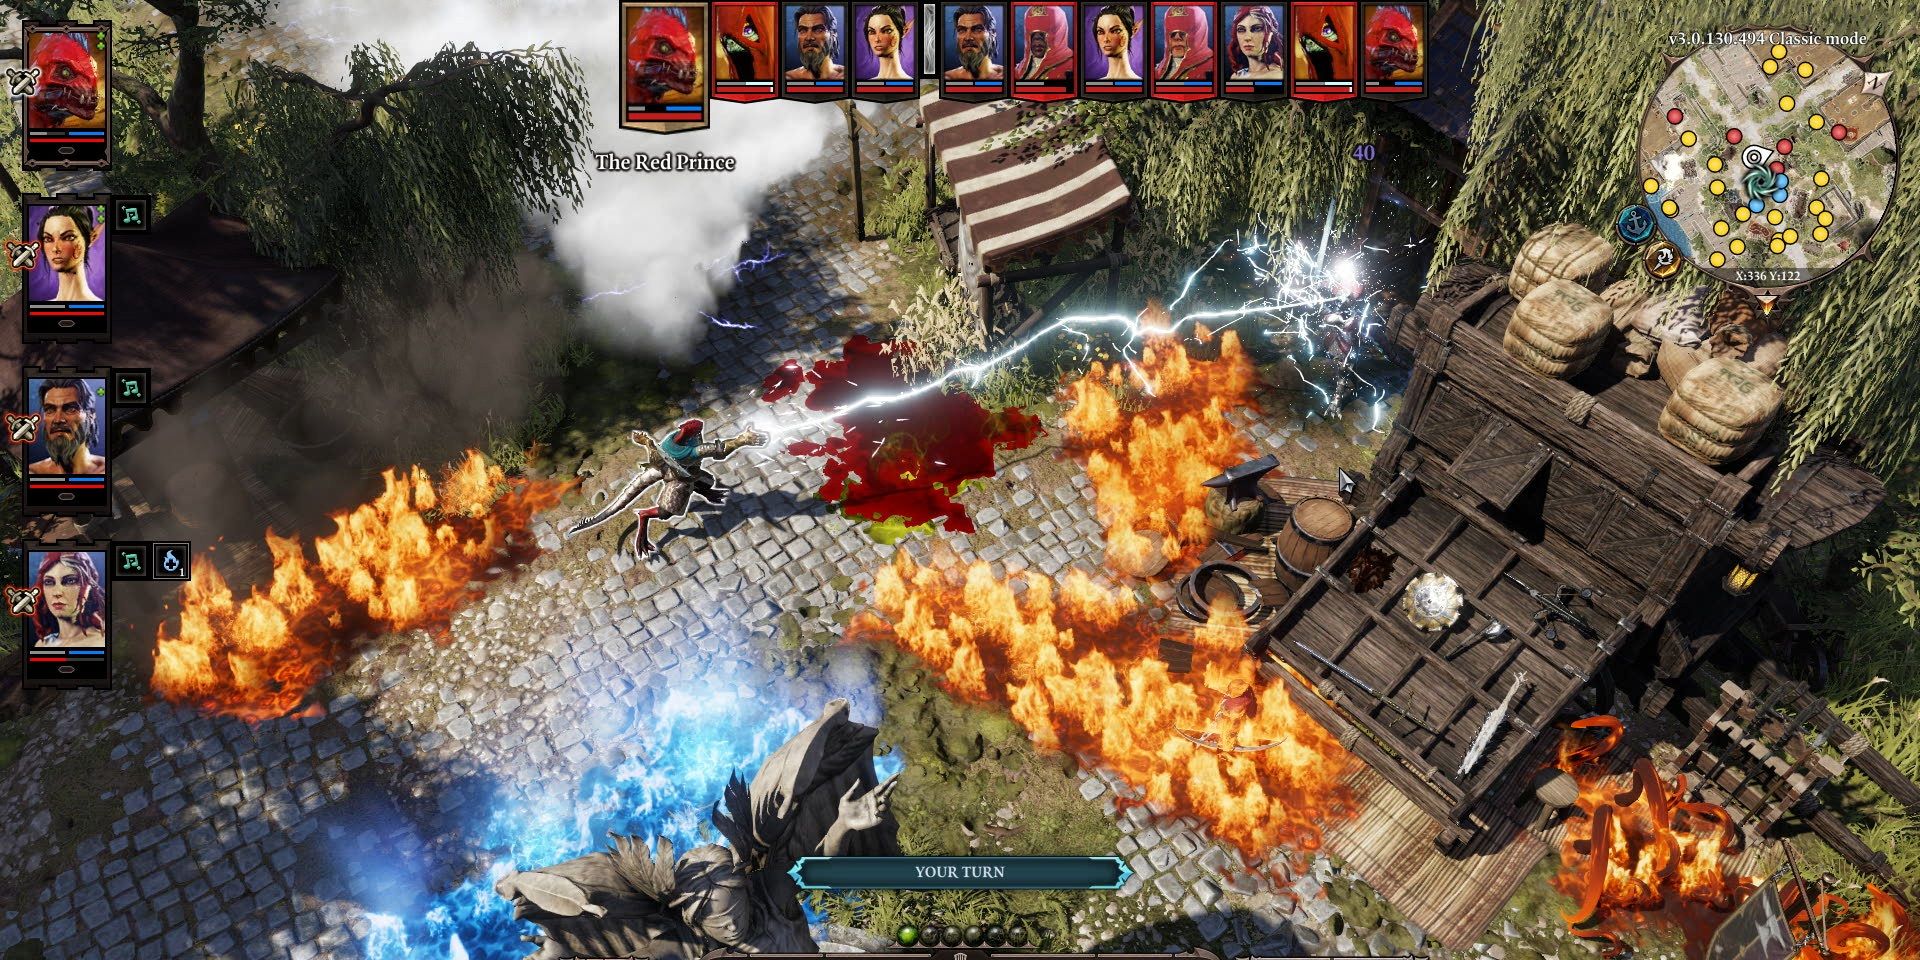 A player attacking someone in Divinity: Original Sin 2